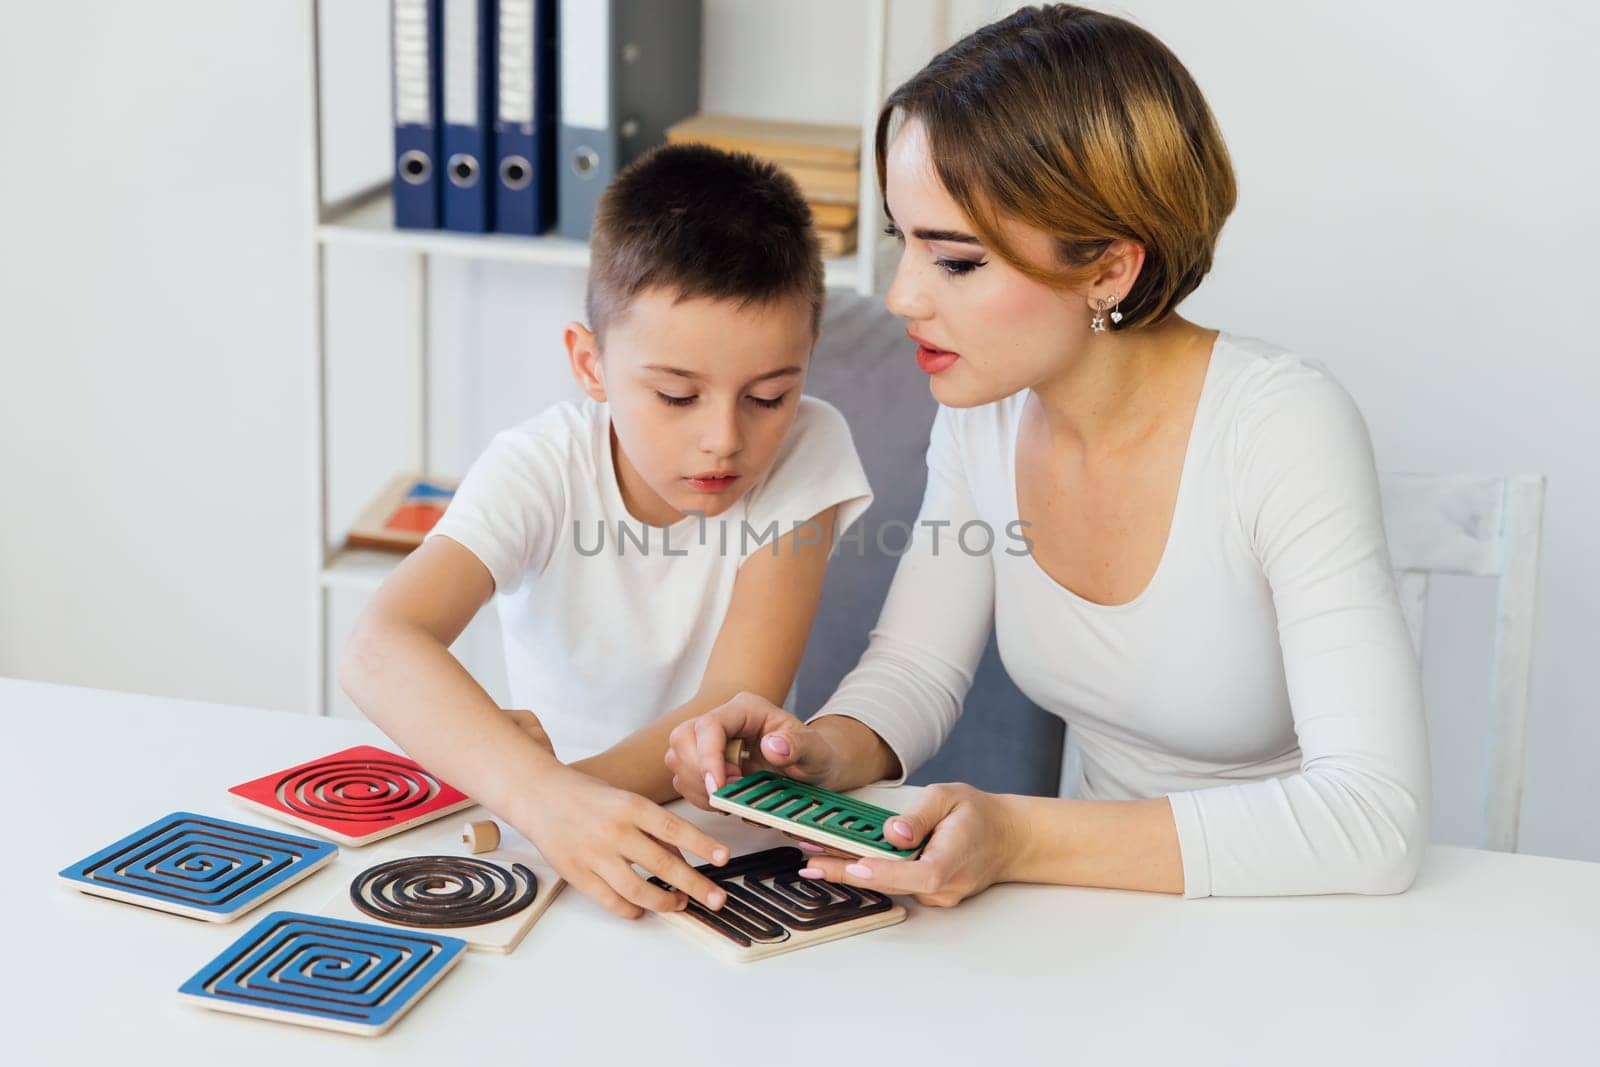 in the office of a psychologist educational games work with the child by Simakov